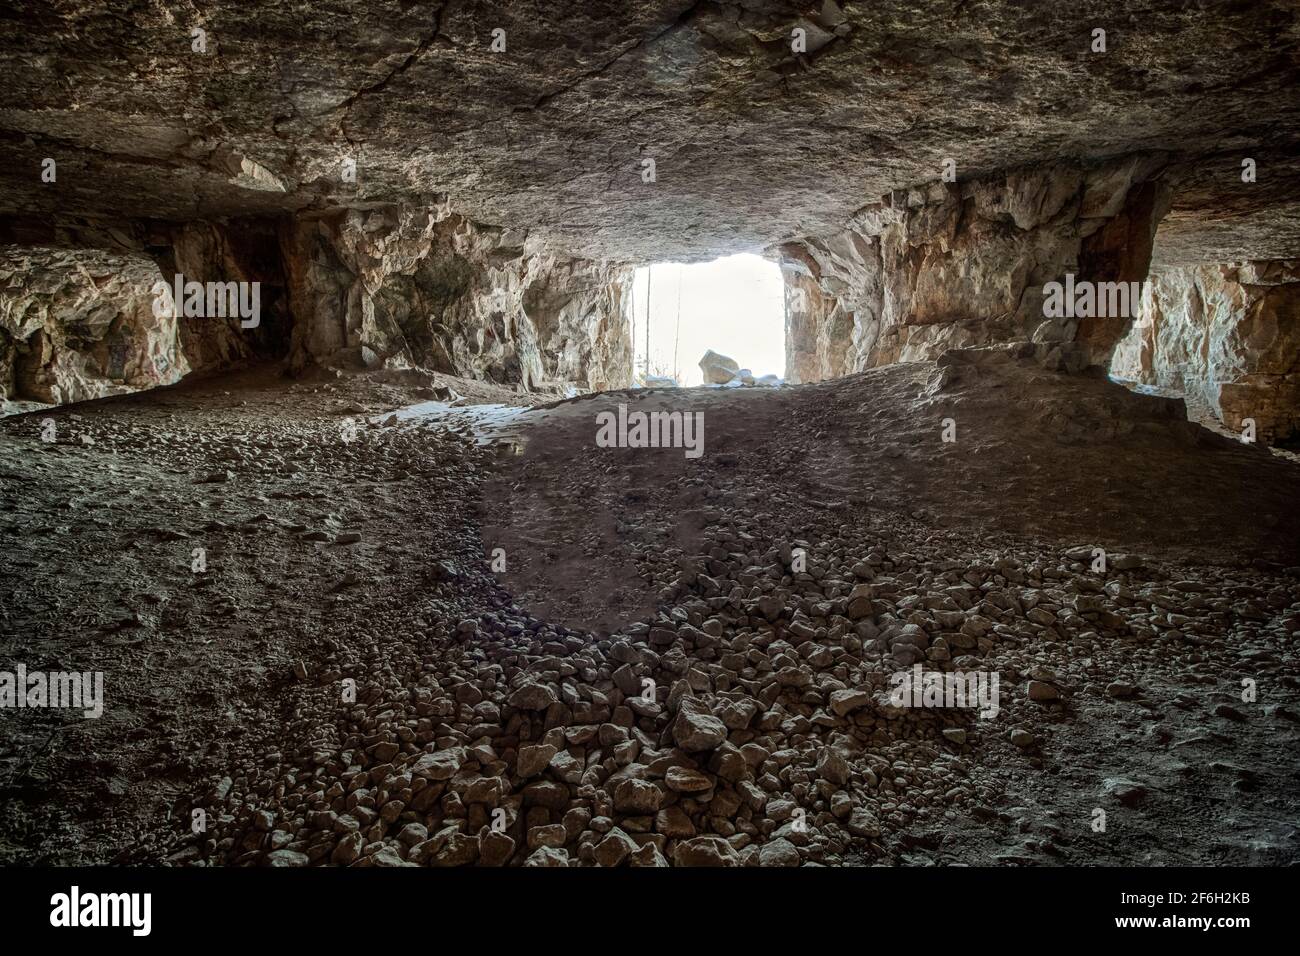 The entrance to the old abandoned limestone adits. Stock Photo